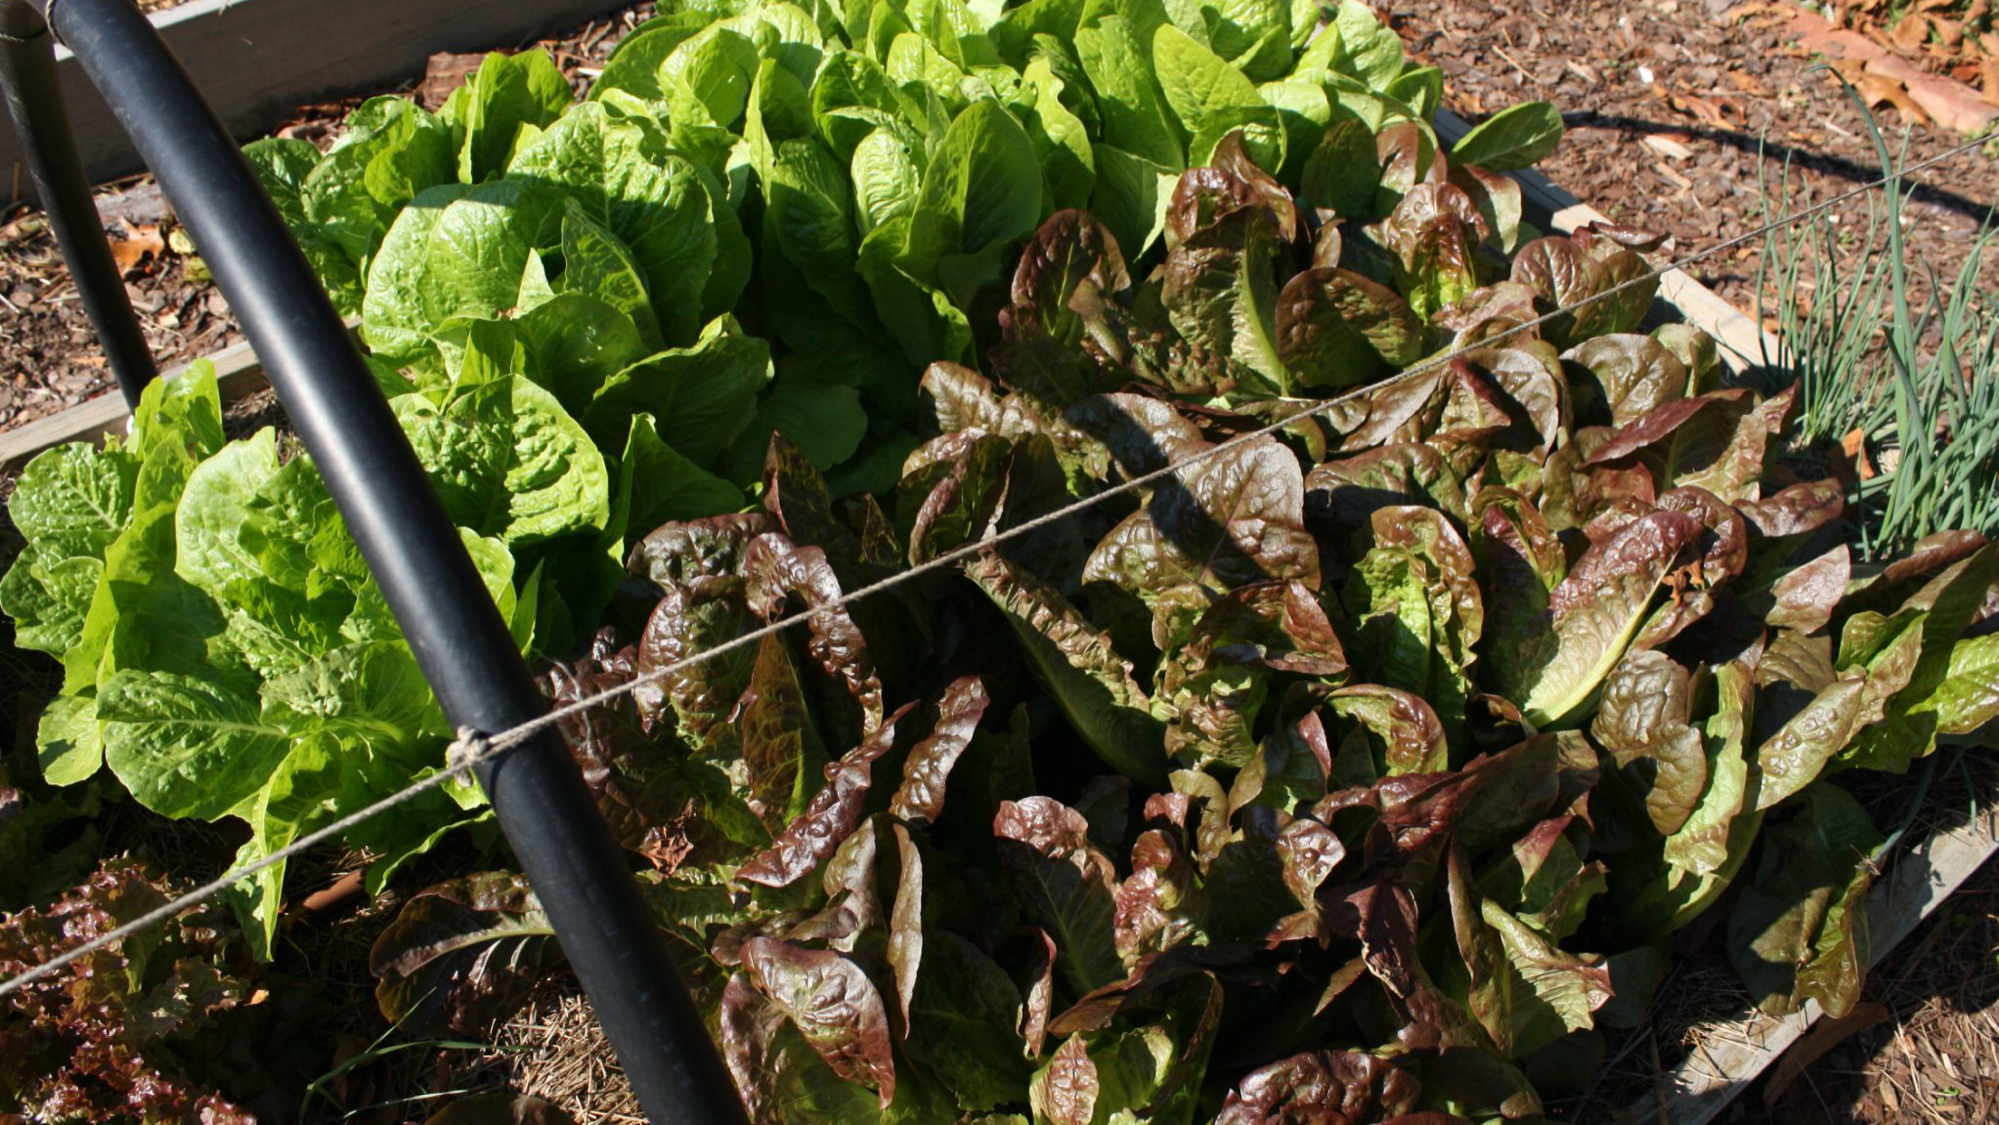 A patch of lettuce in a raised bed.